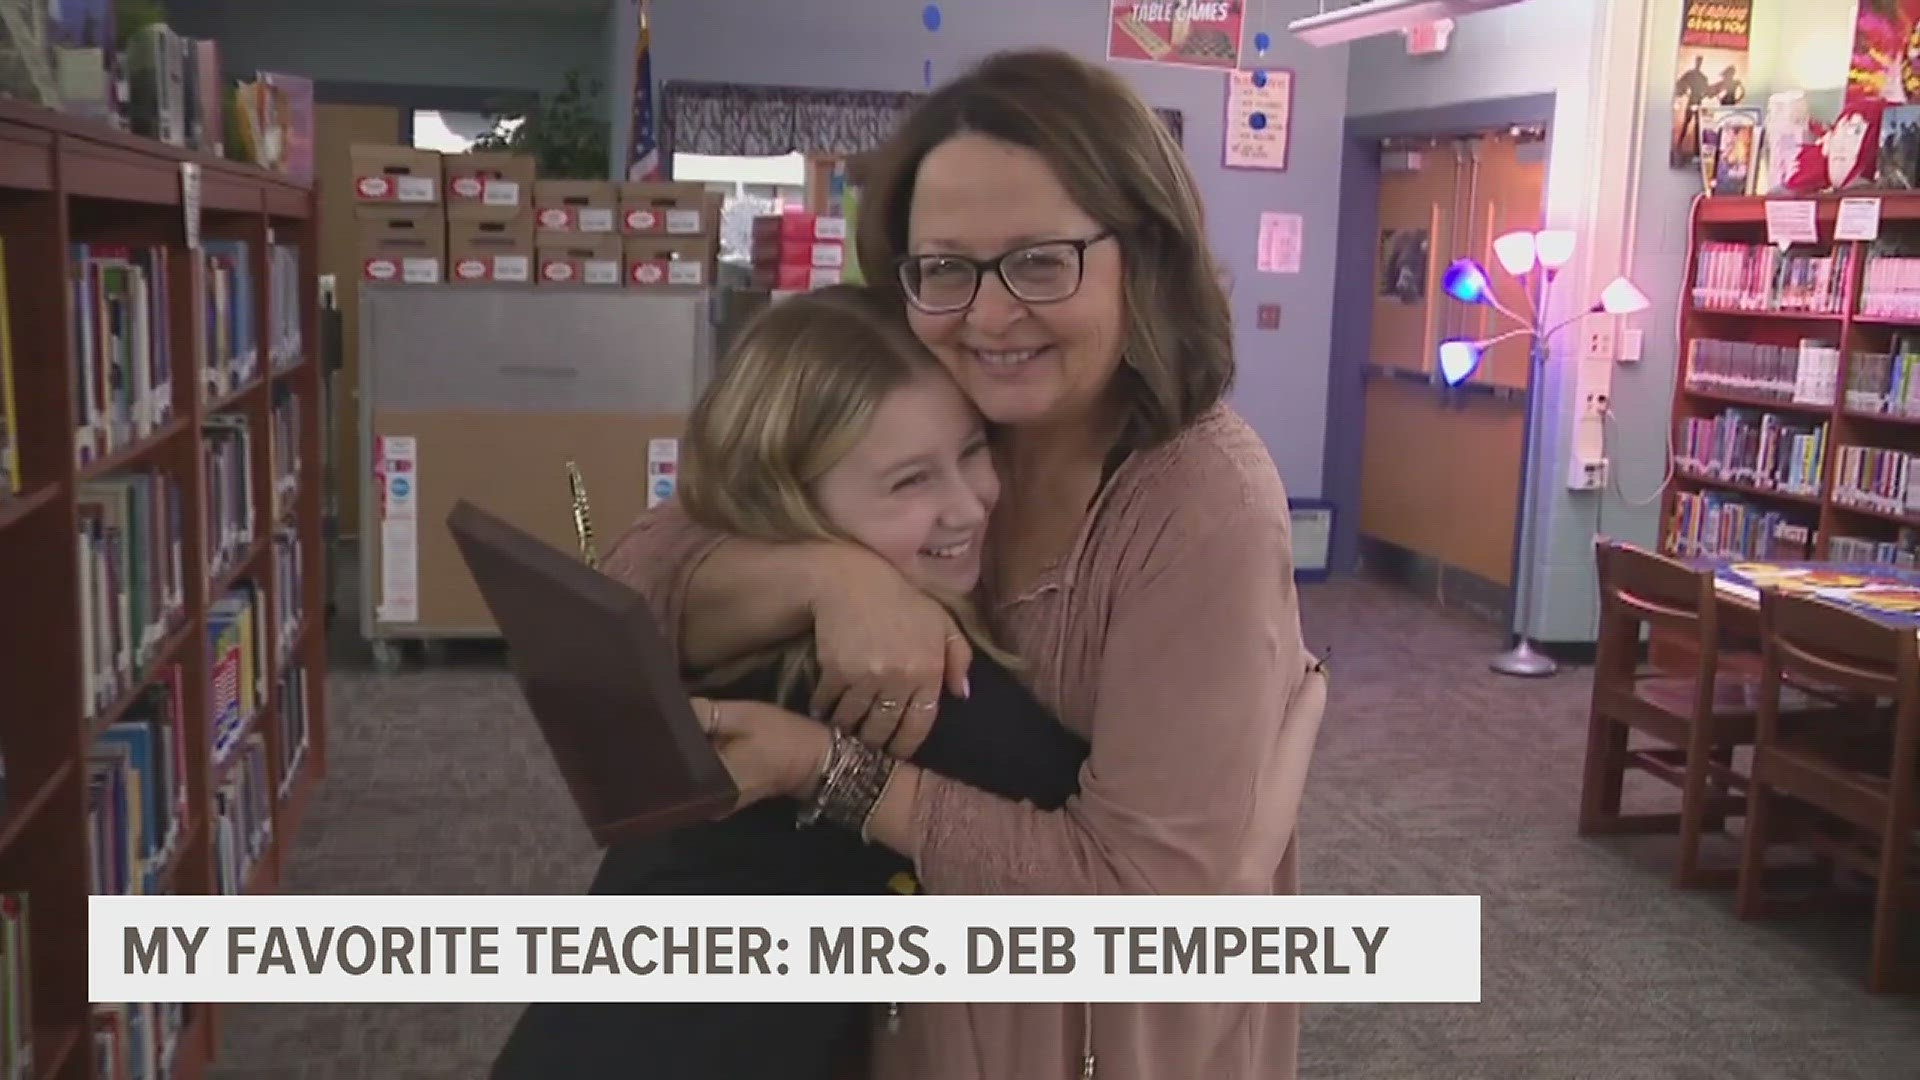 Deborah Temperly has worked in the Bettendorf district for 13 years, but has a unique role to help students across the entire middle school.